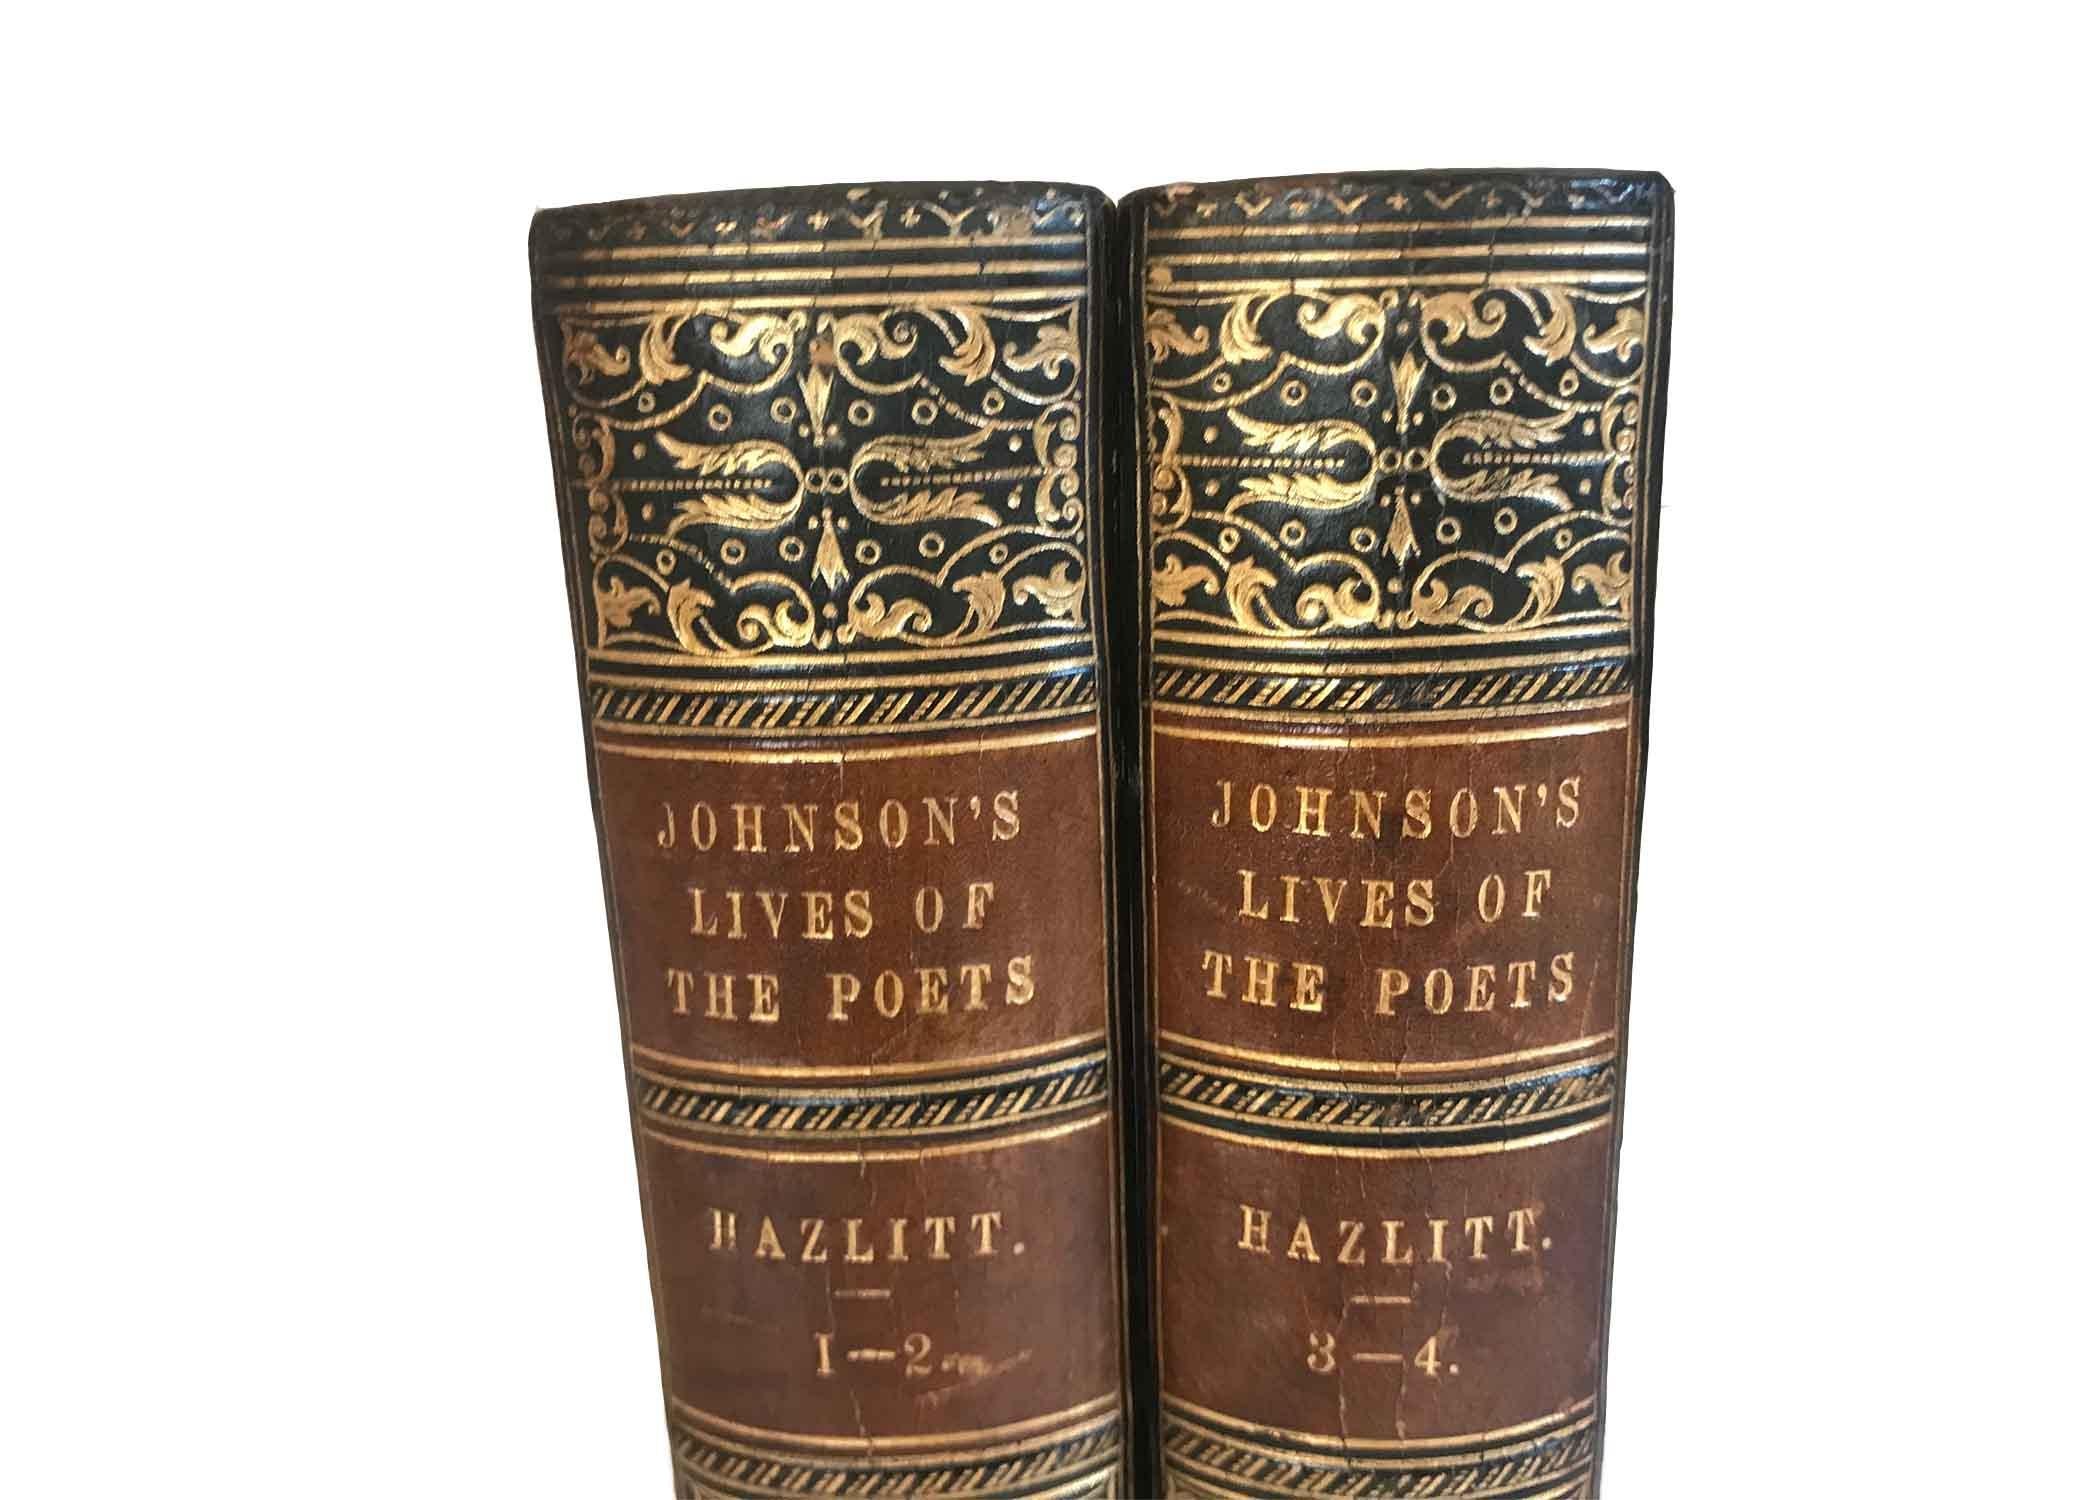 Set of two volumes of Johnson's Lives of the Poets with school crest of Rugby School. The spines are gold on blue leather.